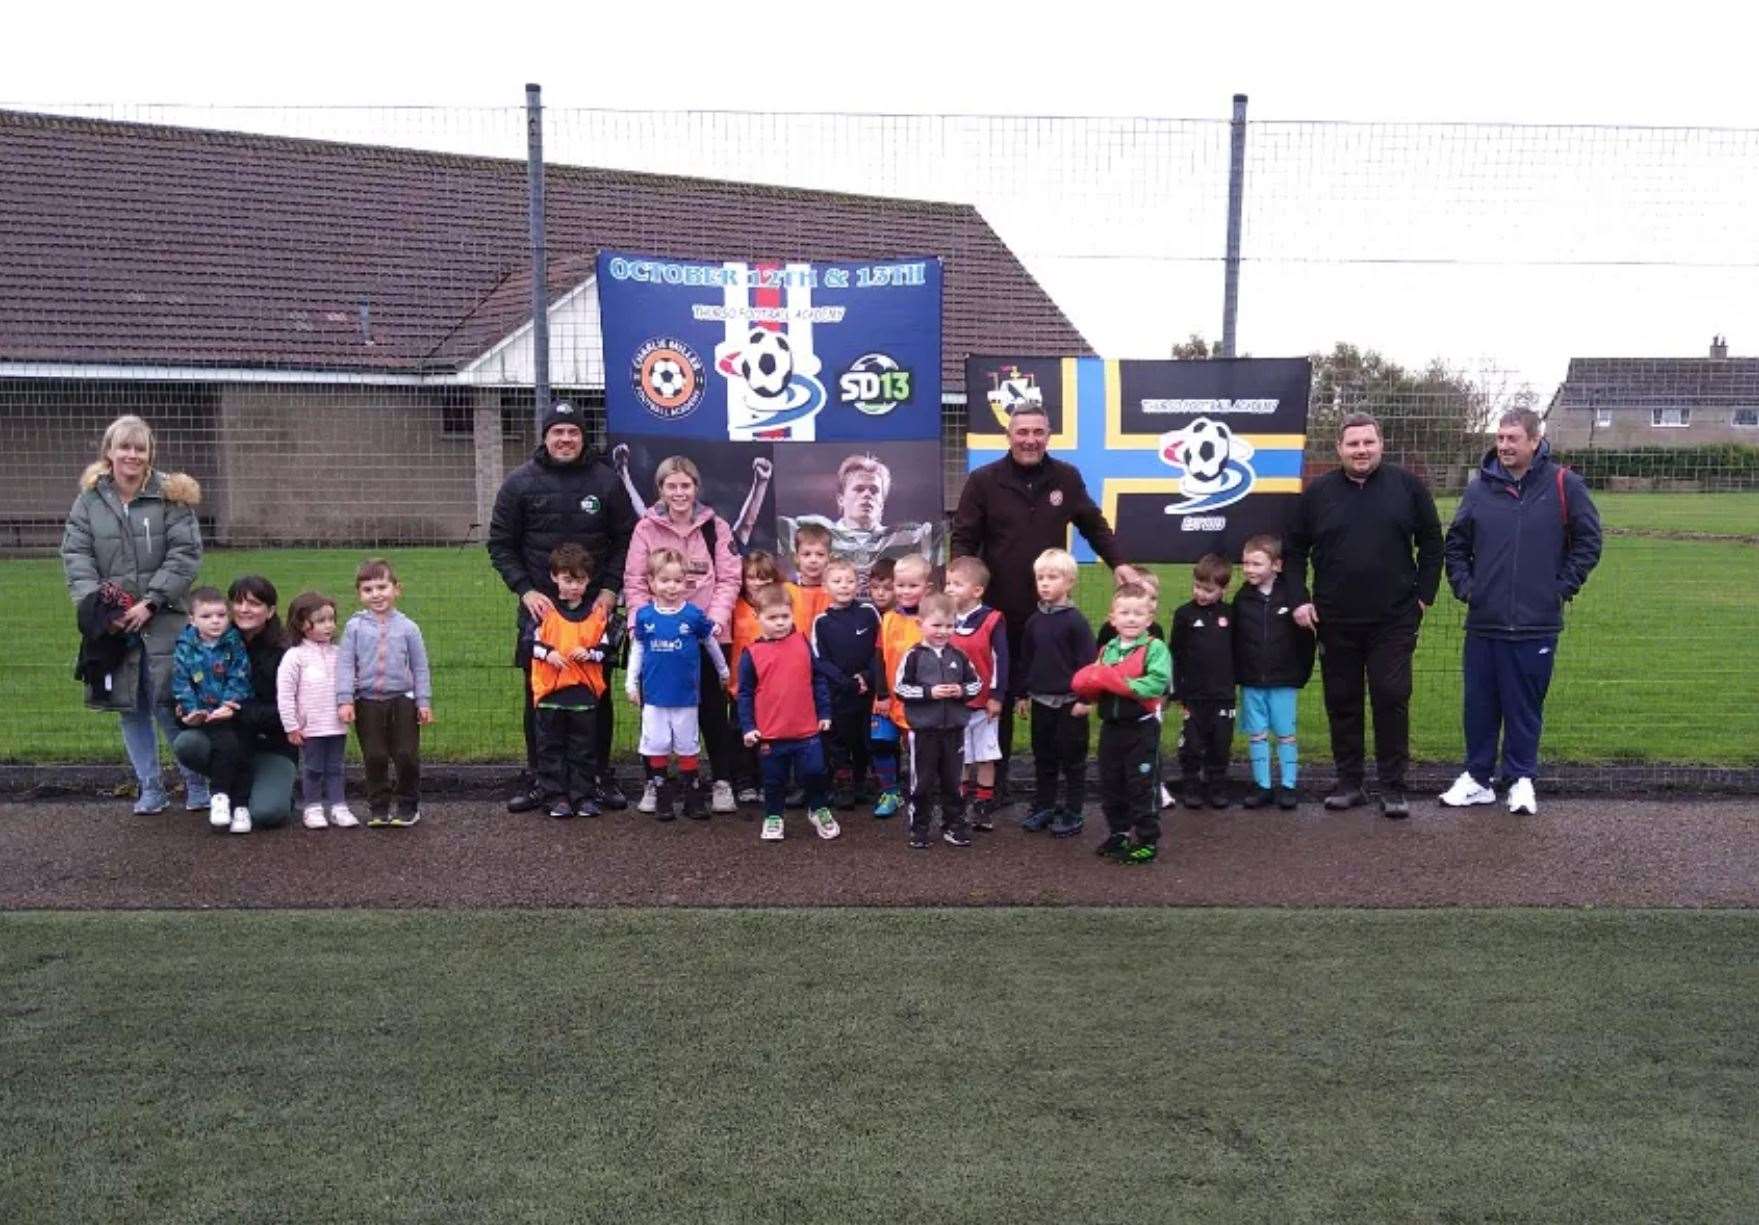 The youngest age group at their coaching session with Simon Donnelly and Charlie Miller.